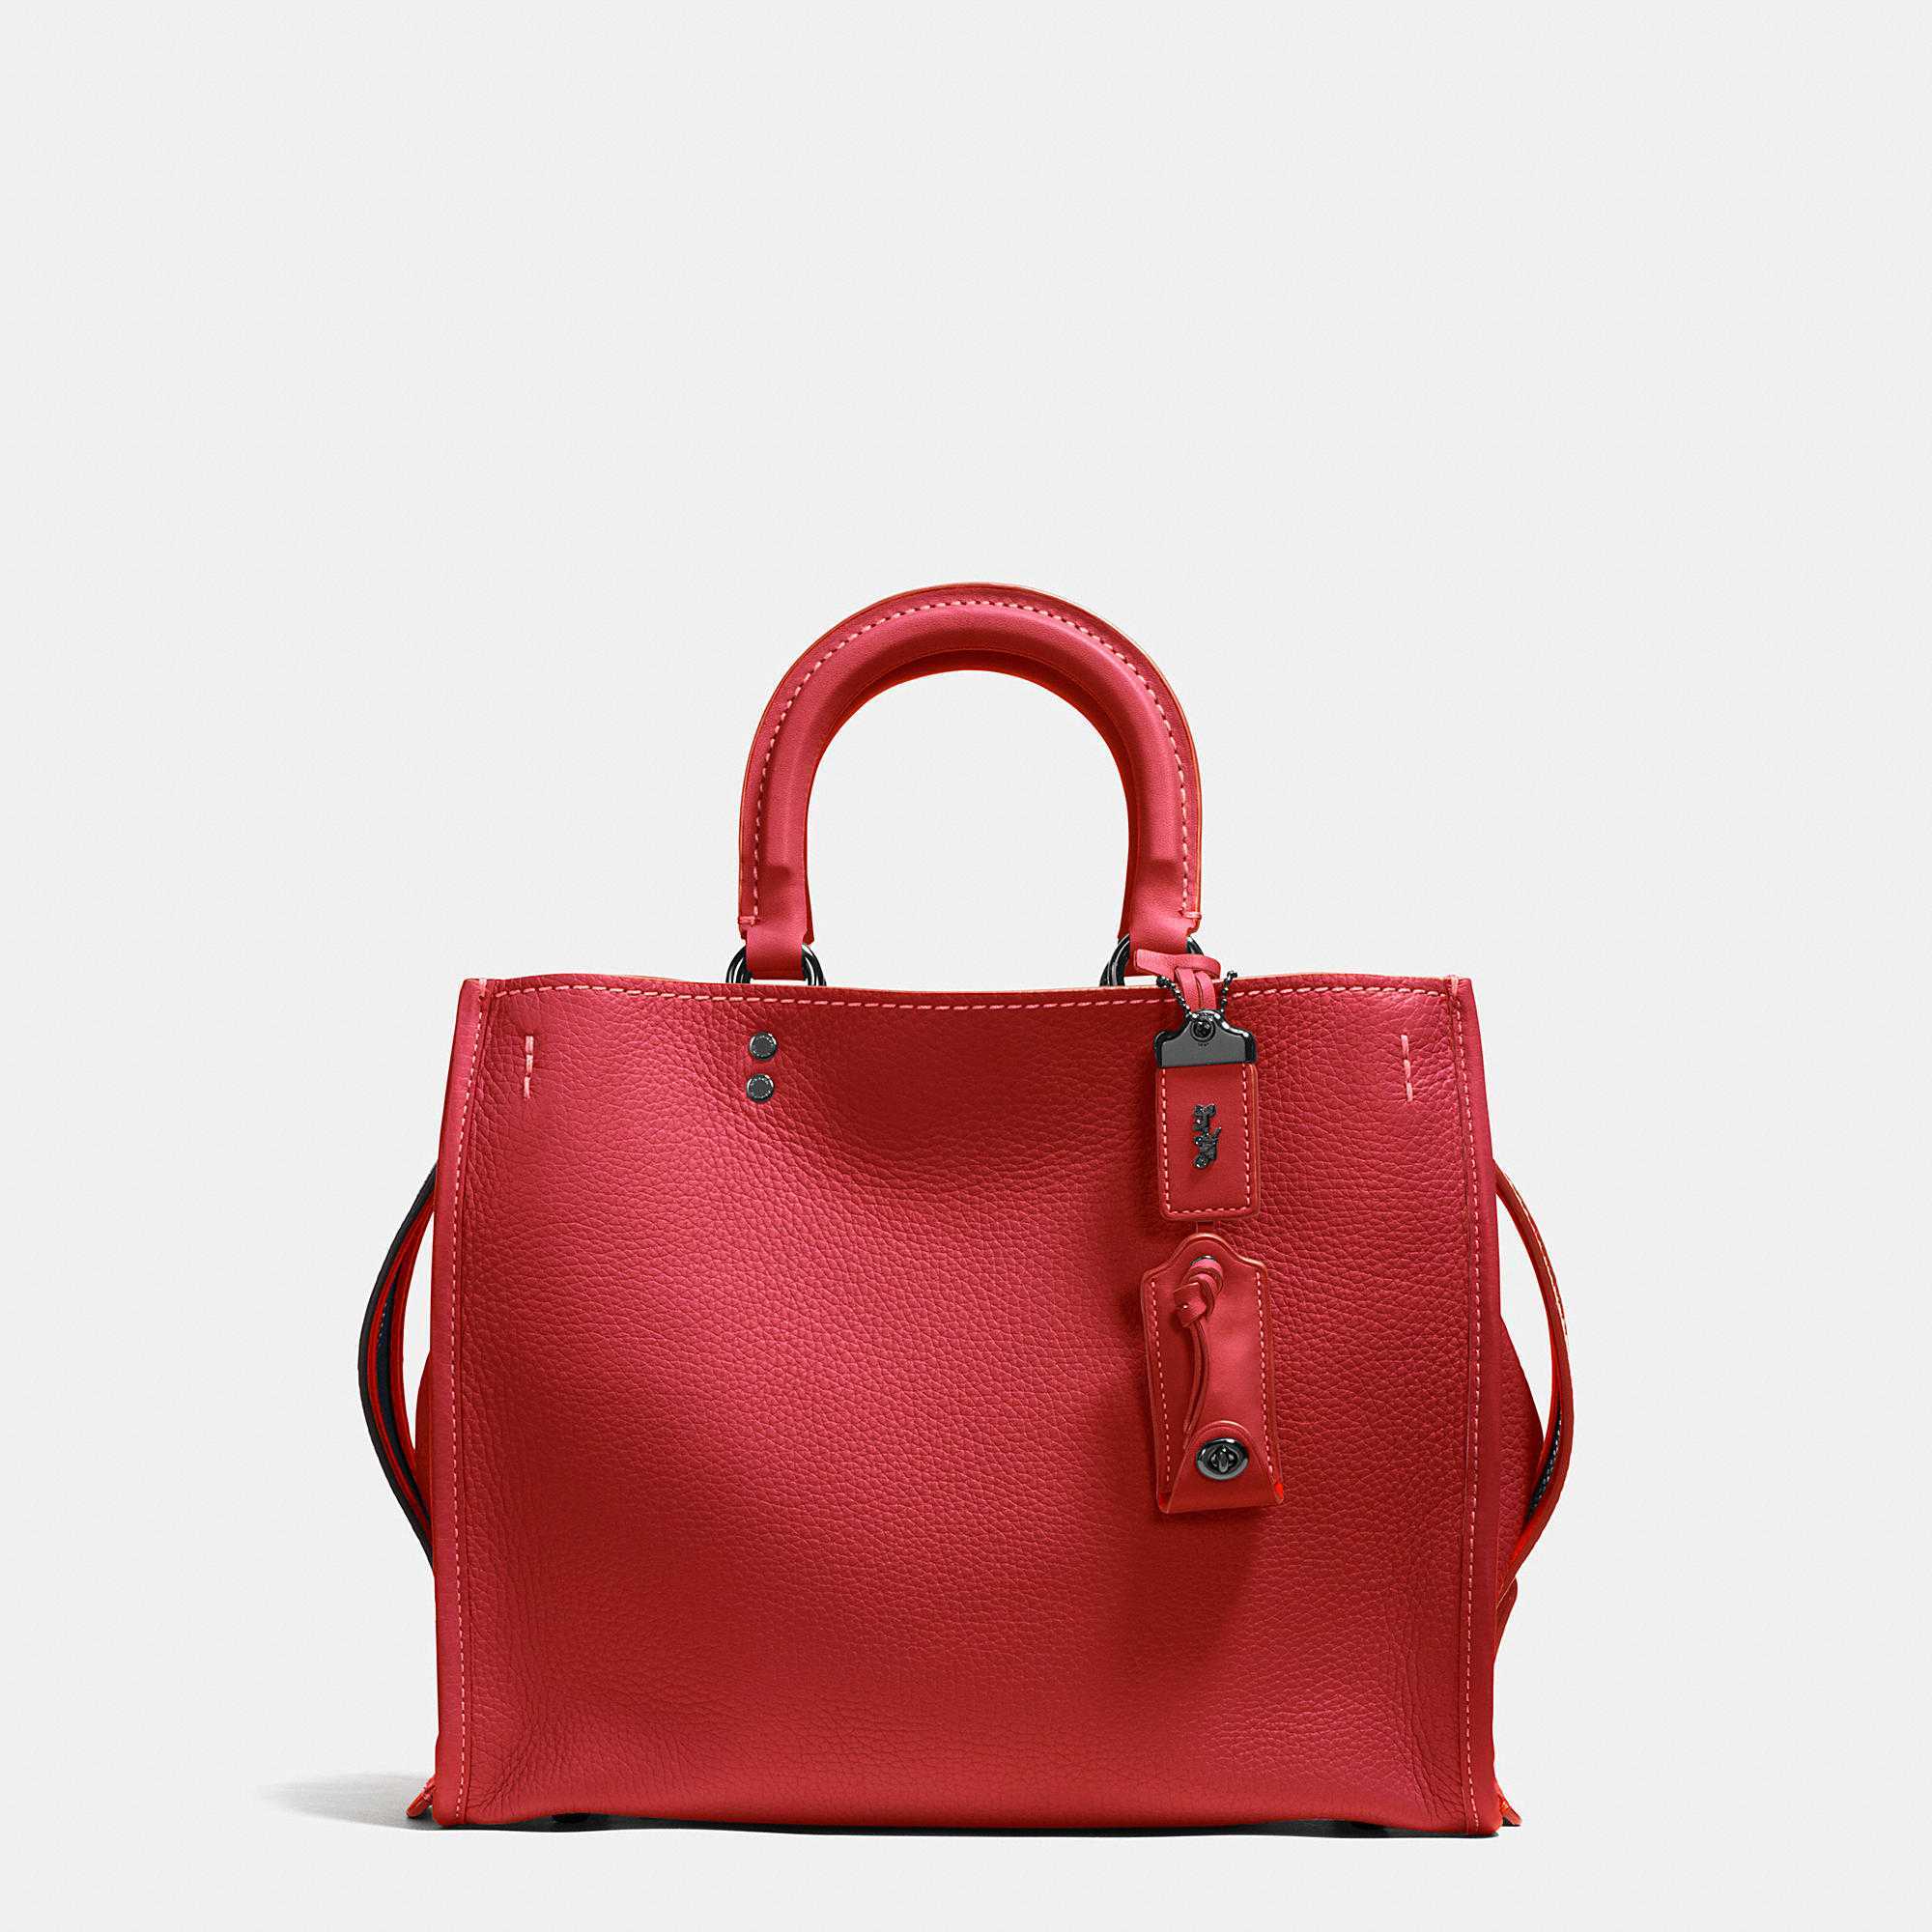 Rogue bag in glovetanned leather STYLE NO. 38124